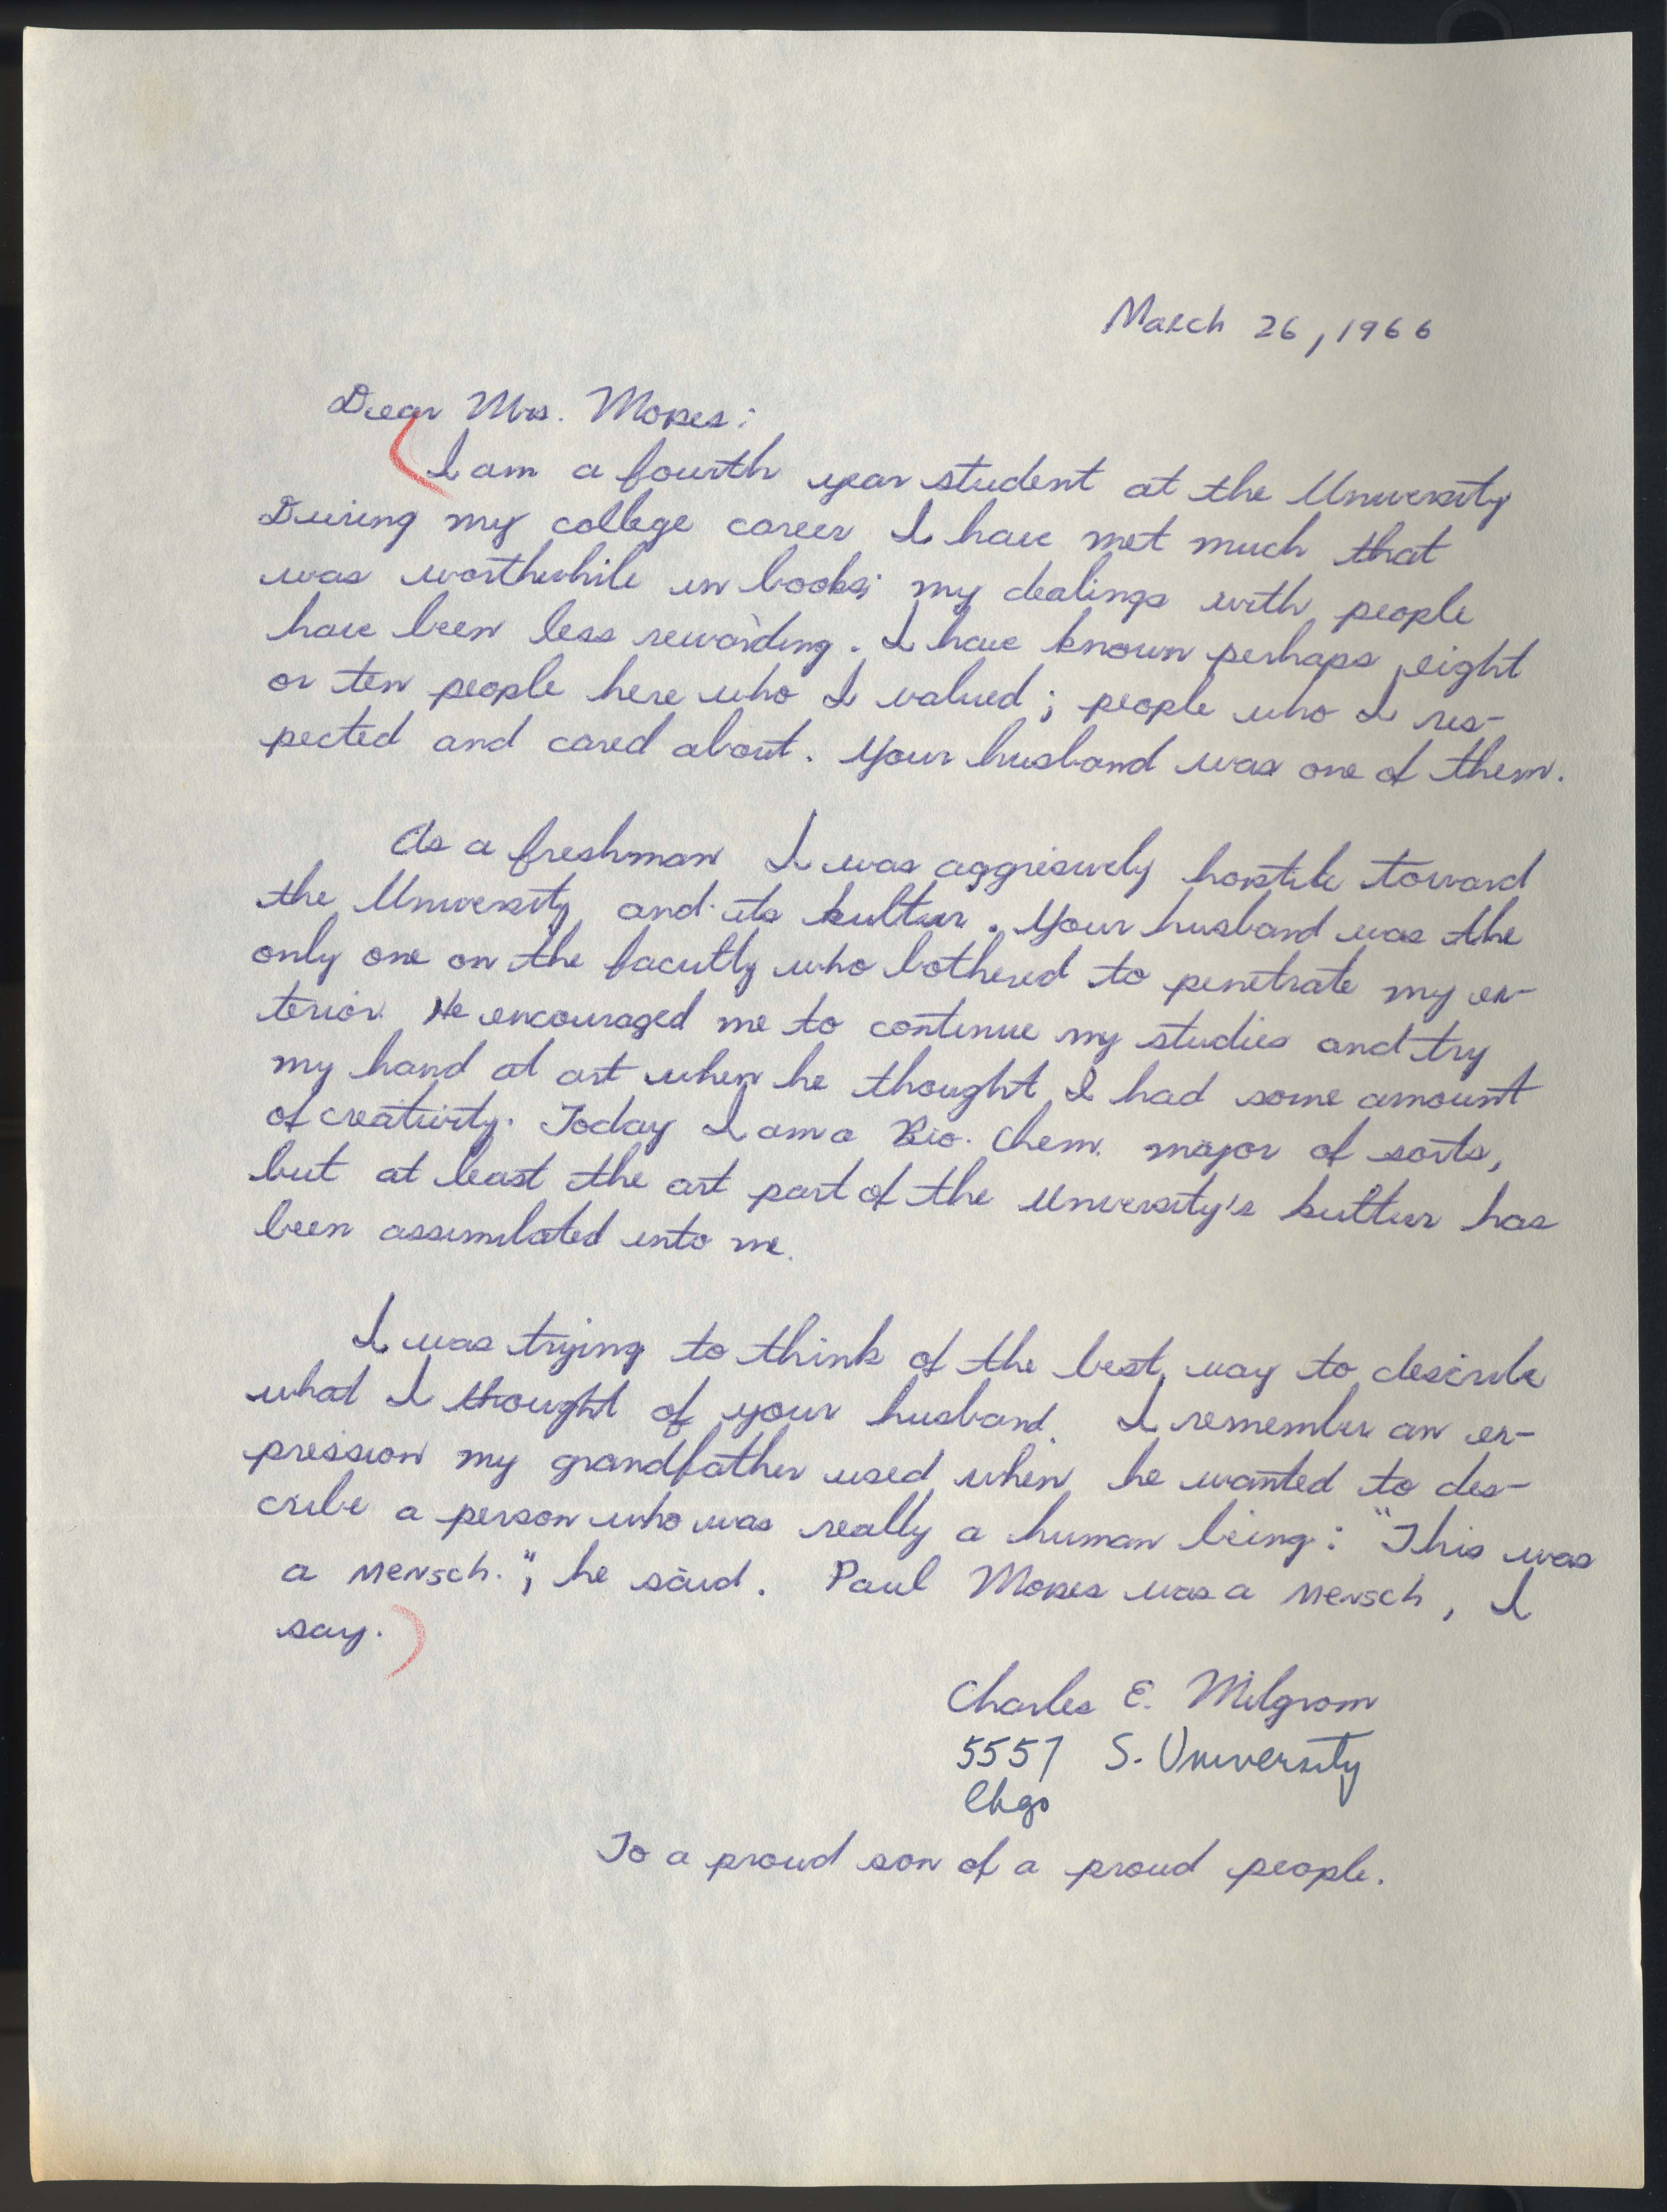 Condolence letter from Charles Milgrom to Alice Moses, 1966